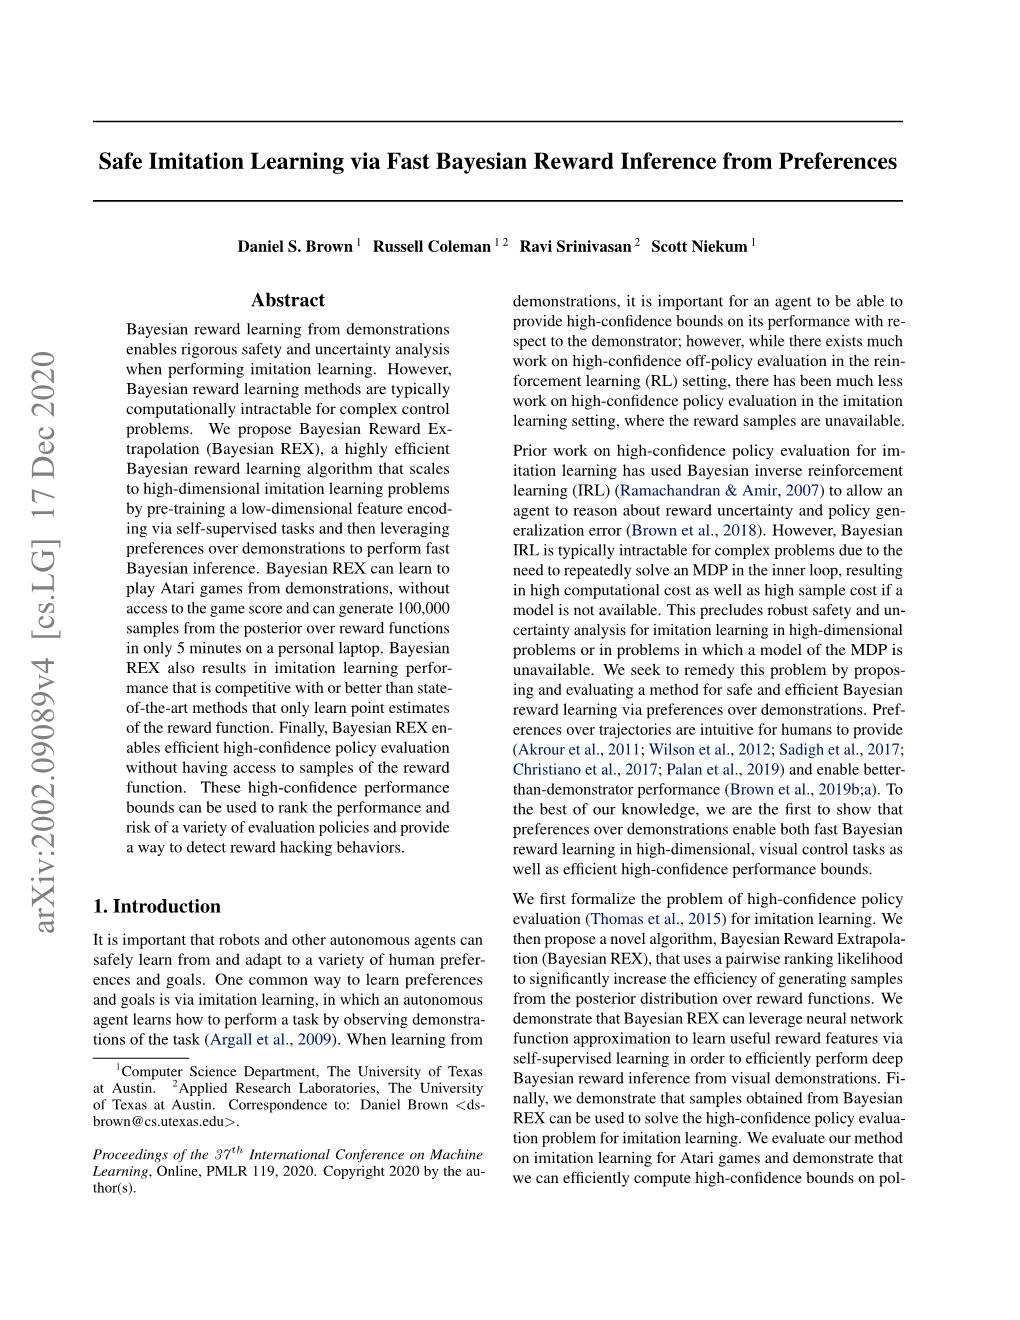 Safe Imitation Learning Via Fast Bayesian Reward Inference from Preferences